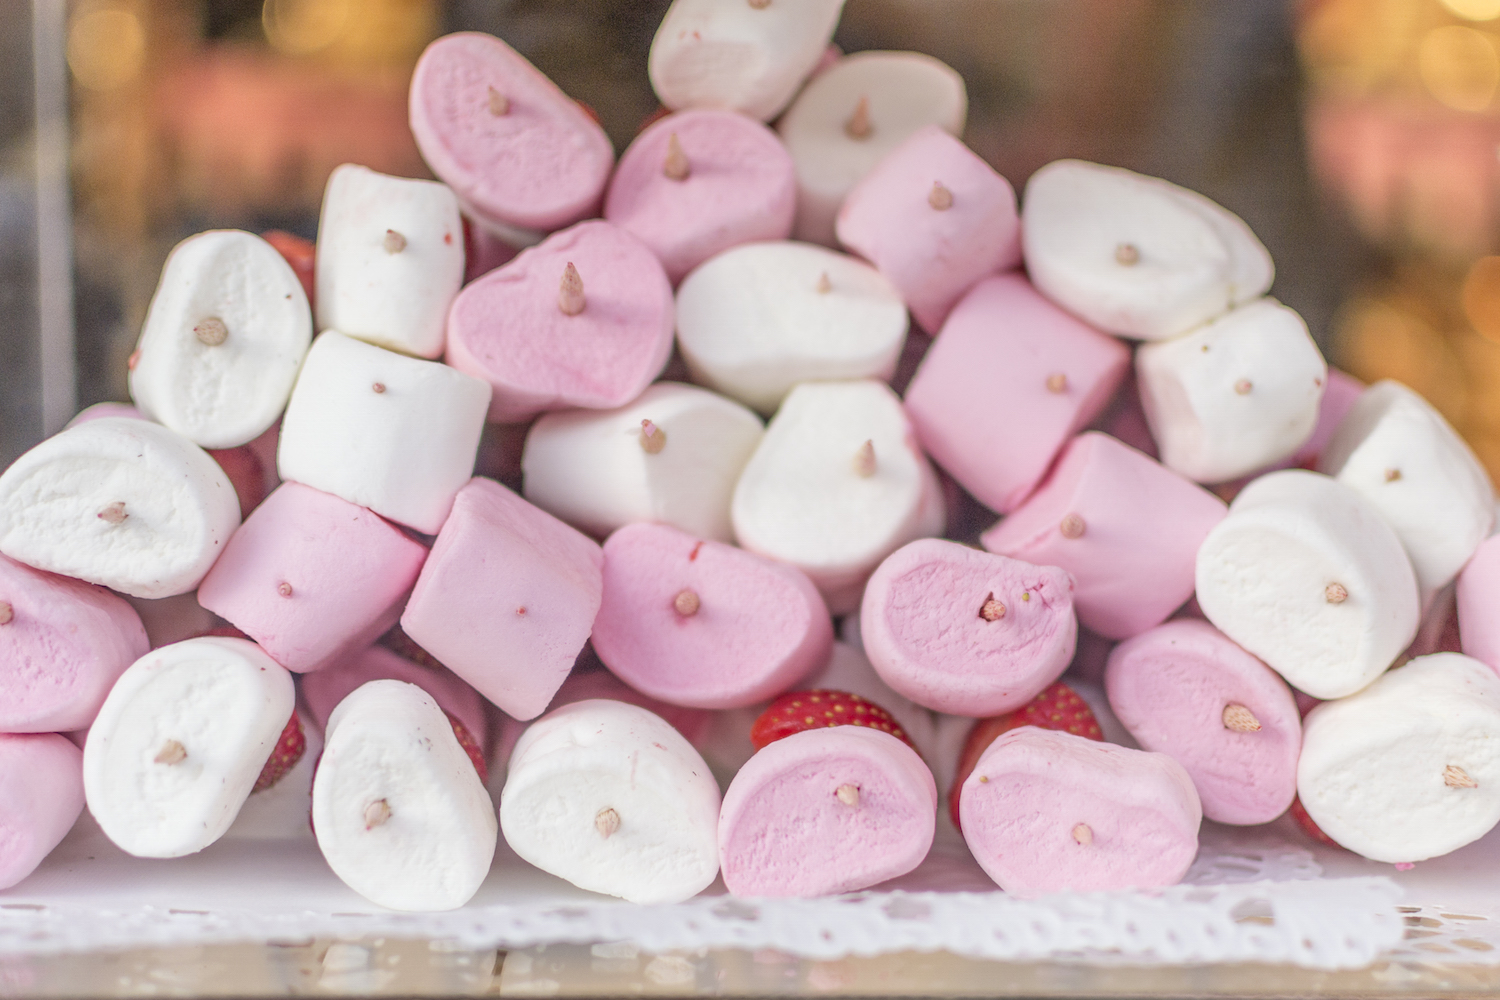 Marshmellow and strawberry sticks at the Christmas market.jpg